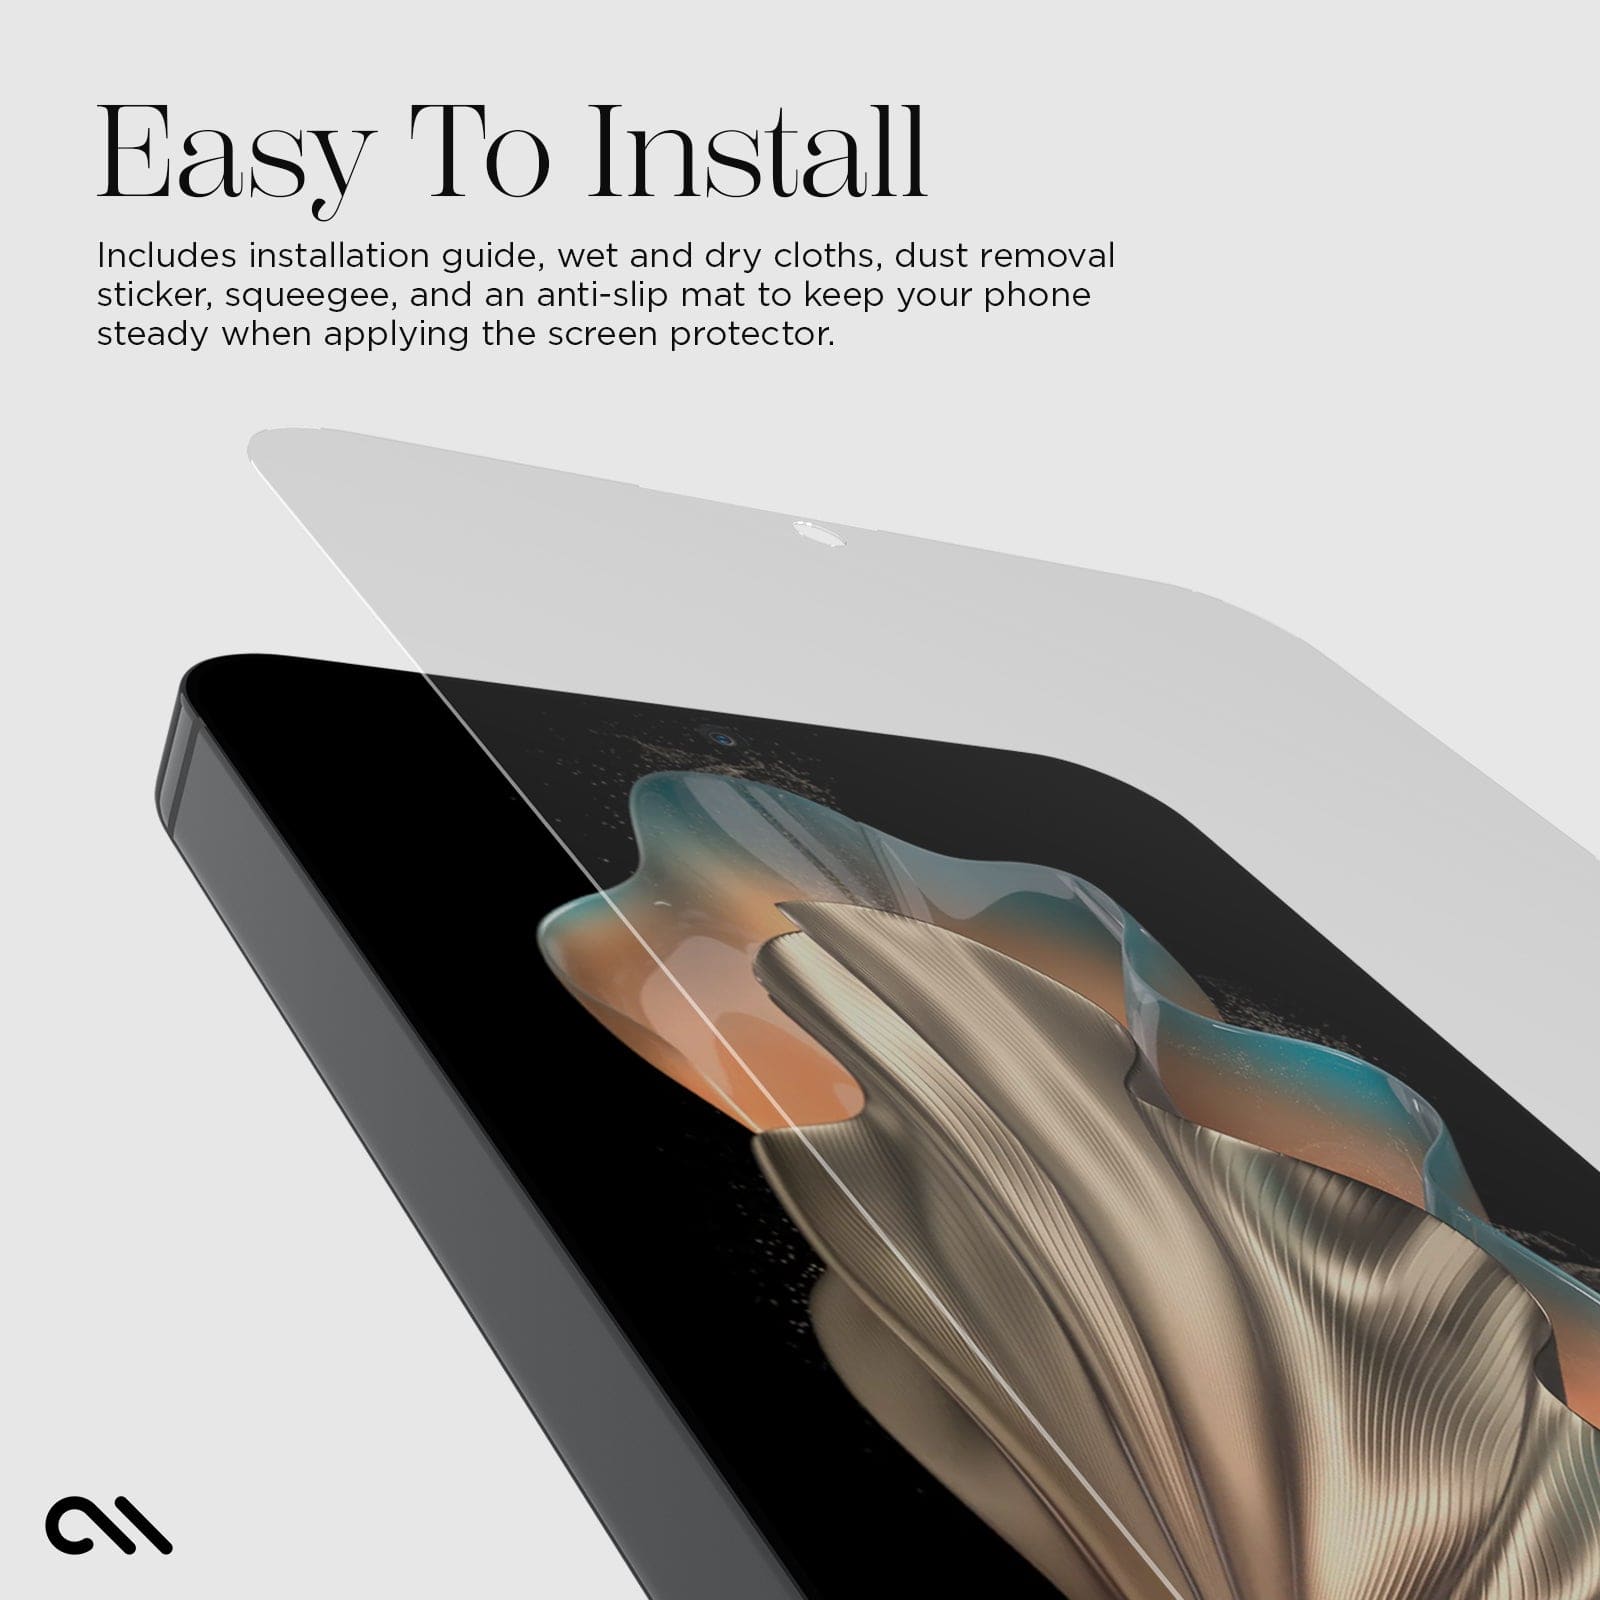 EASY TO INSTALL. INCLUDES INSTALLATION GUIDE, WET AND DRY CLOTHS, DUST REMOVAL STICKER, SQUEEGEE, AND AN ANTI-SLIP MAT TO KEEP YOUR PHONE STEADY WHEN APPLYING THE SCREEN PROTECTOR